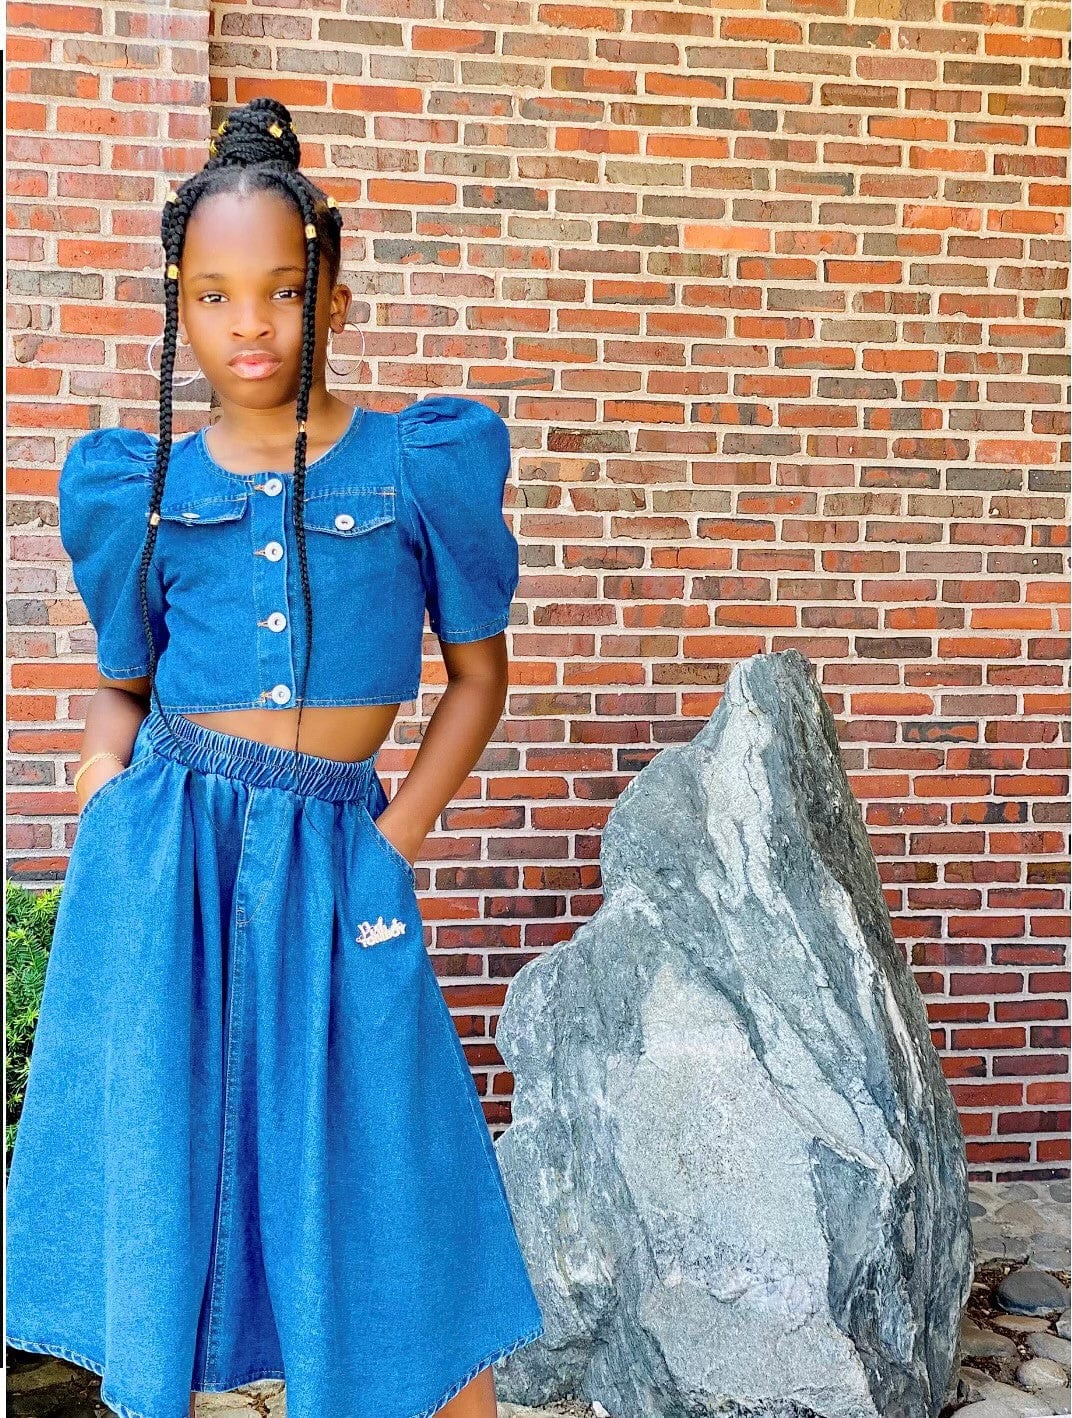 Posh Tomboy Outfit Sets Midday at the Met 2 Piece Denim Skirt Set